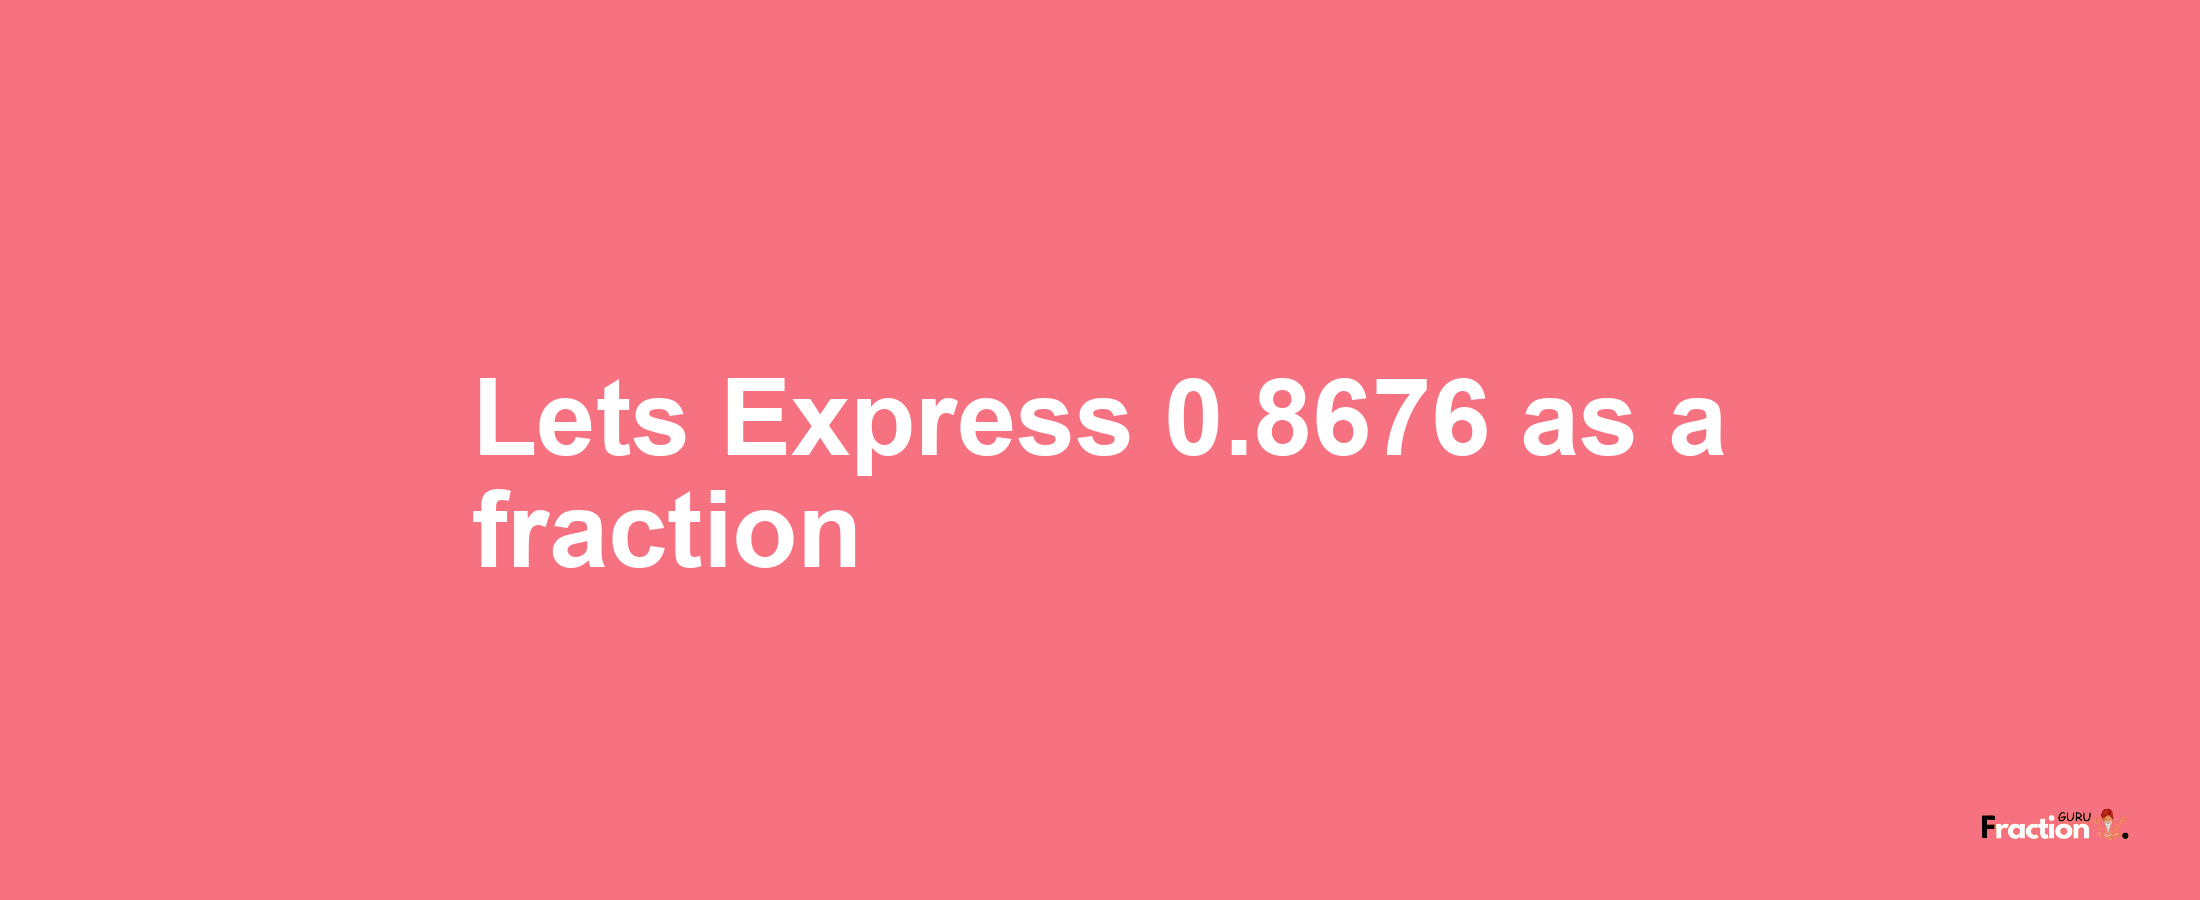 Lets Express 0.8676 as afraction